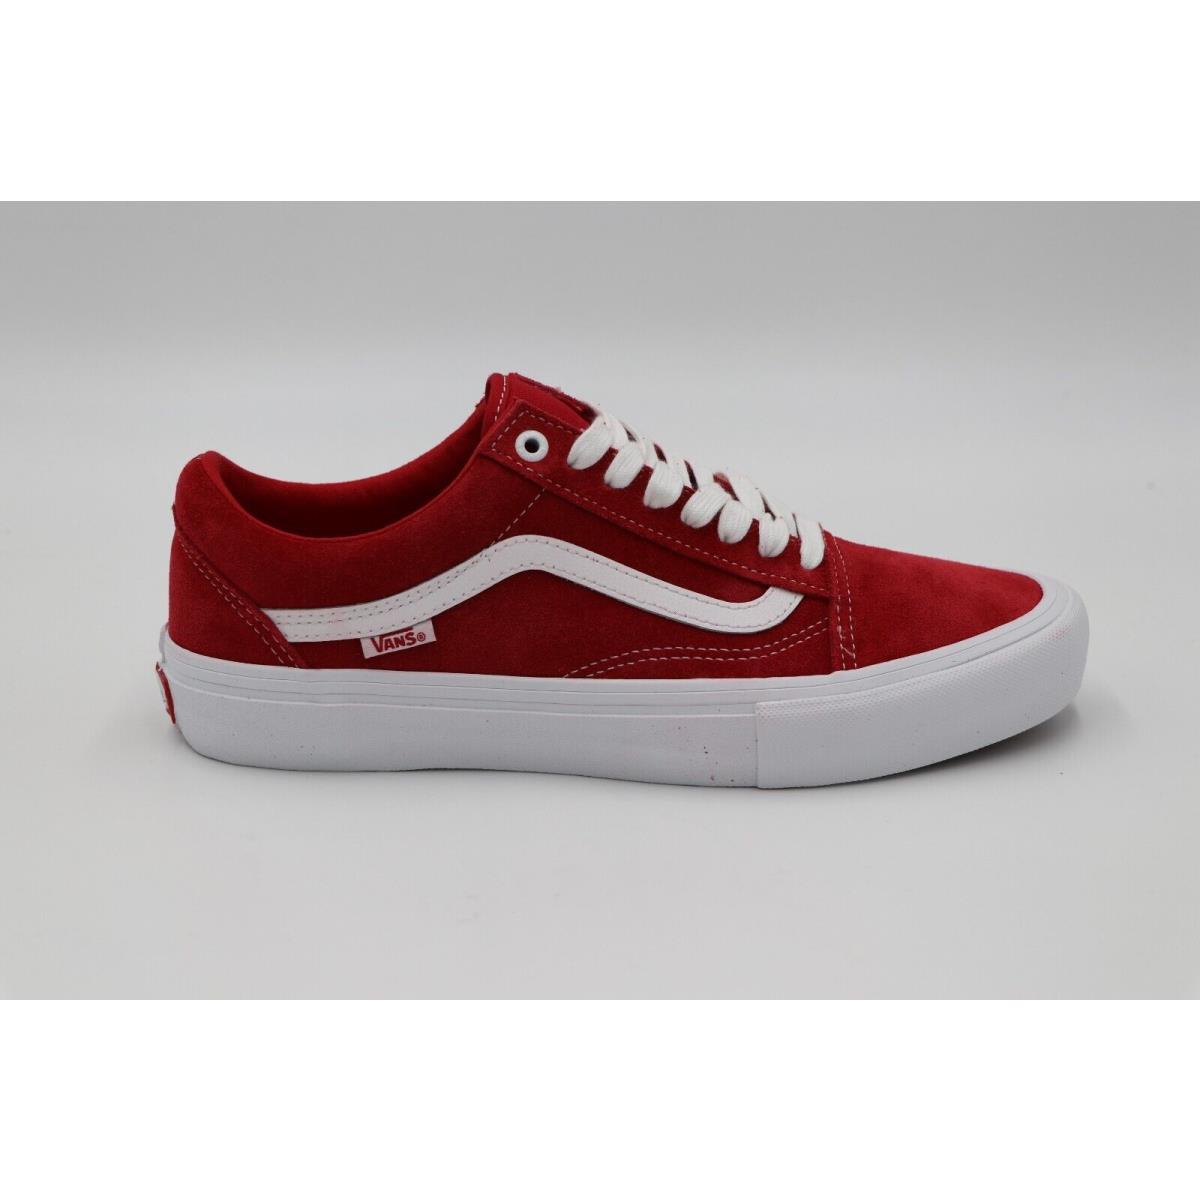 Old Skool Pro Shoes - Vans Red/White (suede)